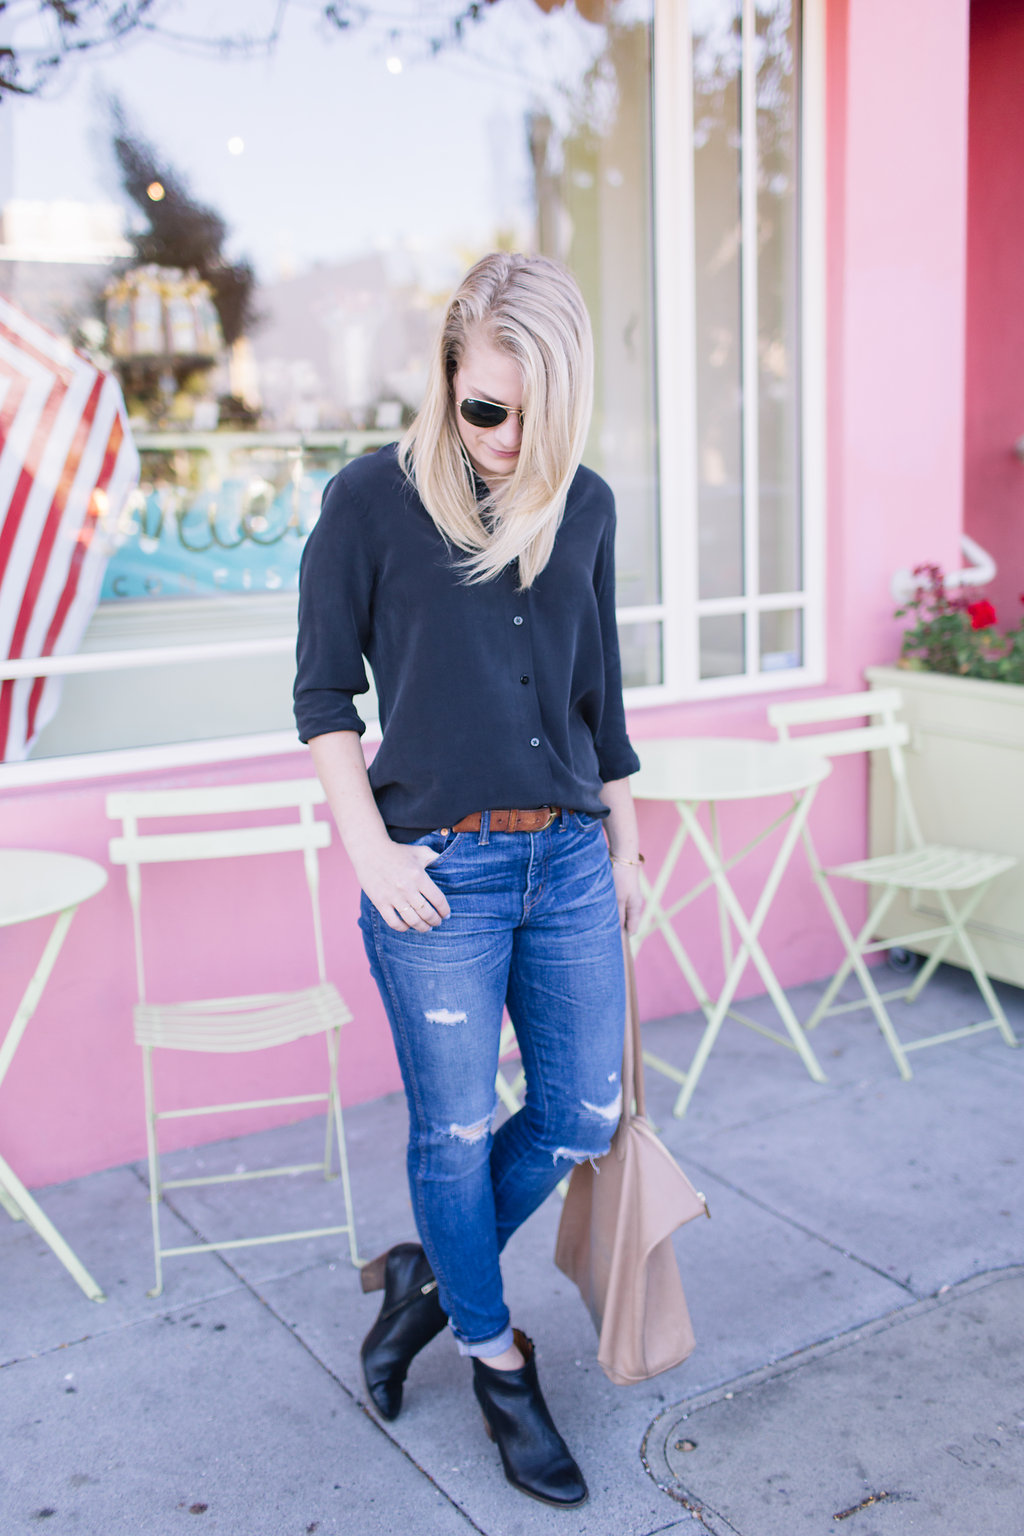 Everyday Uniform // Everlane silk top with Madewell denim and ankle boots.